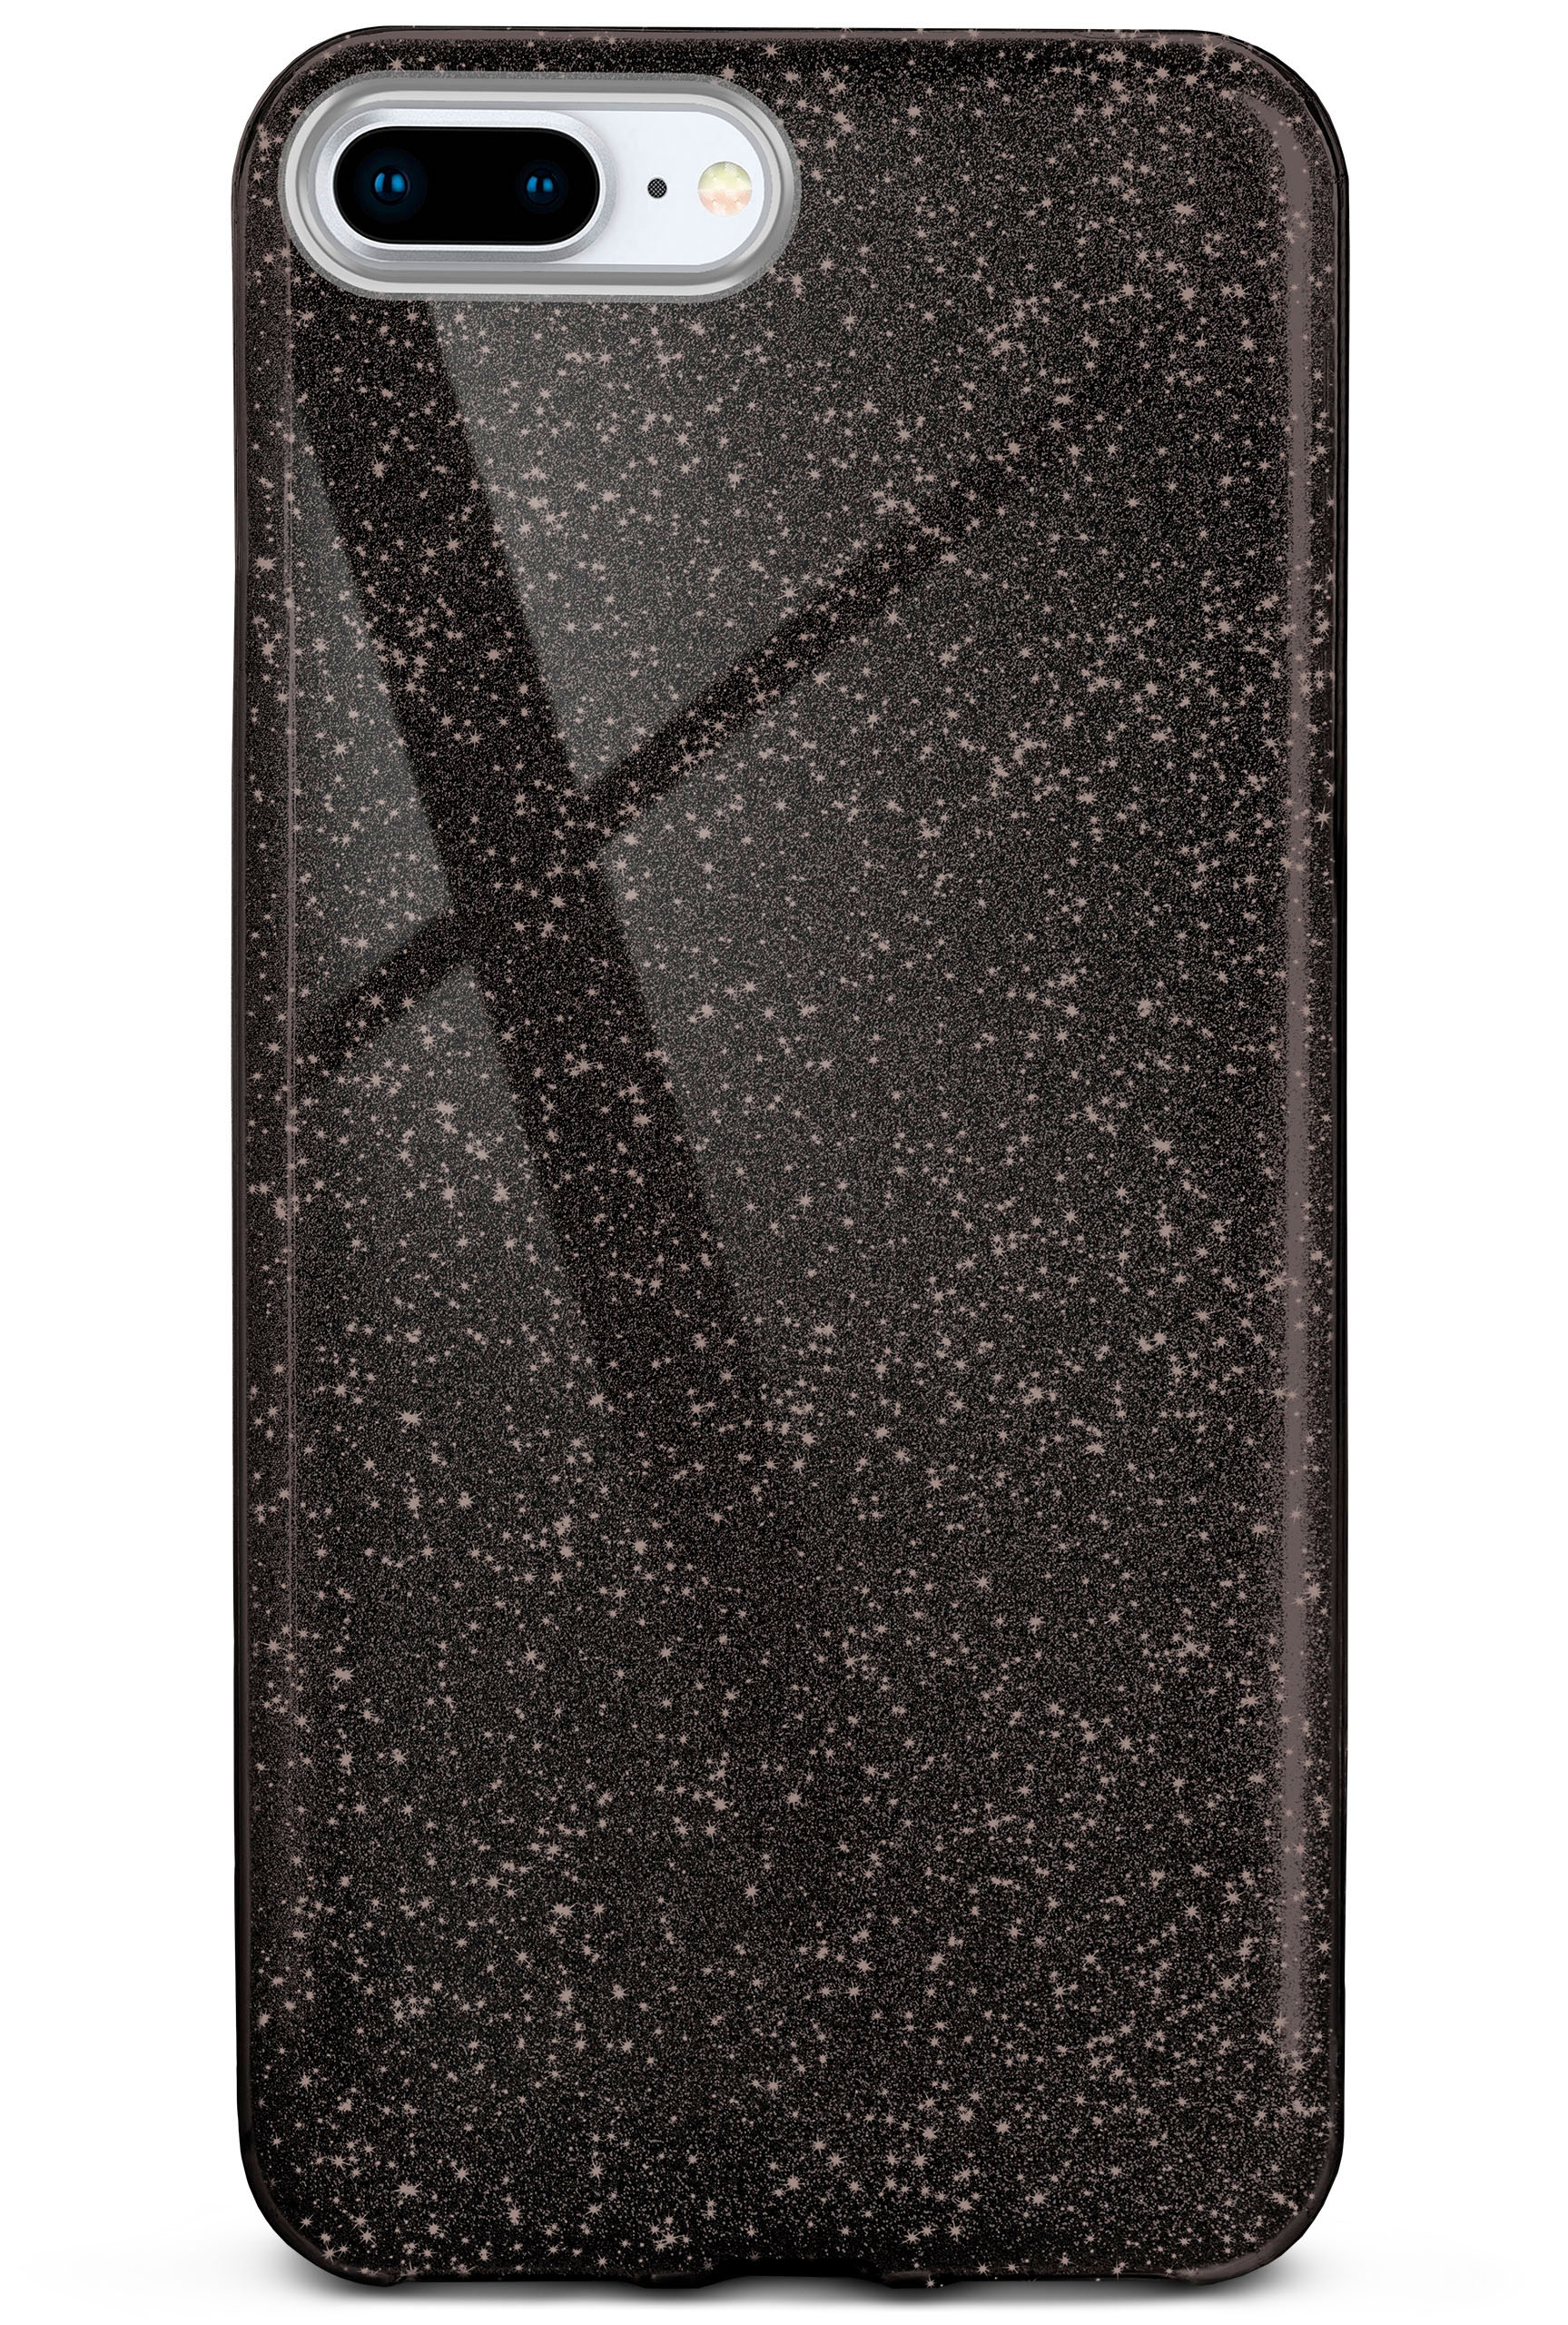 Black 8 Plus Glitter Case, Glamour ONEFLOW 7 Apple, iPhone iPhone Backcover, / - Plus,